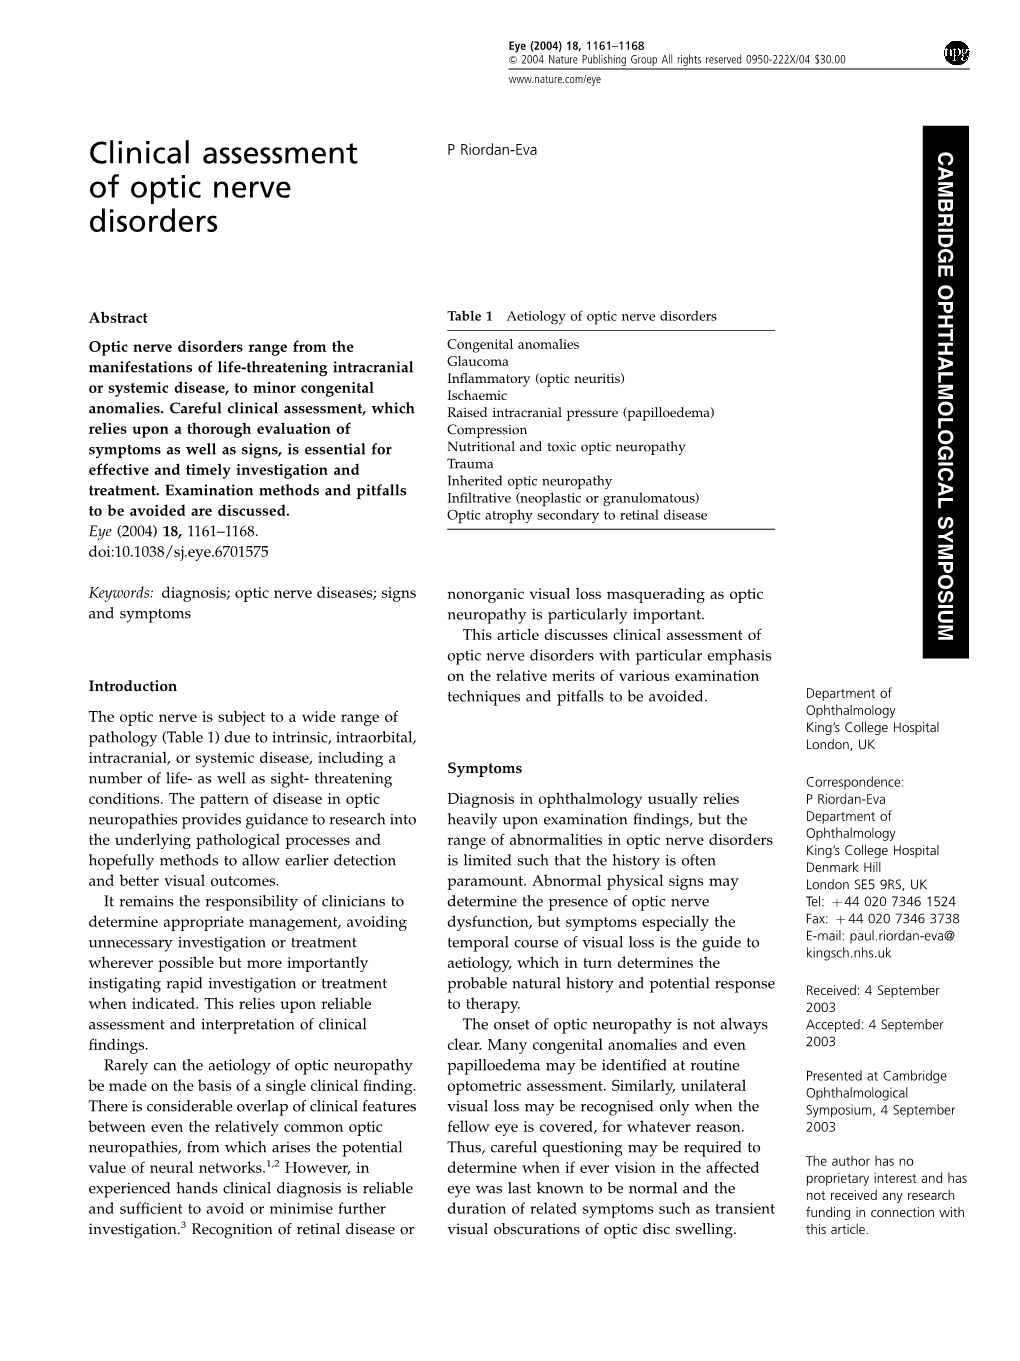 Clinical Assessment of Optic Nerve Disorders with Particular Emphasis on the Relative Merits of Various Examination Introduction Techniques and Pitfalls to Be Avoided